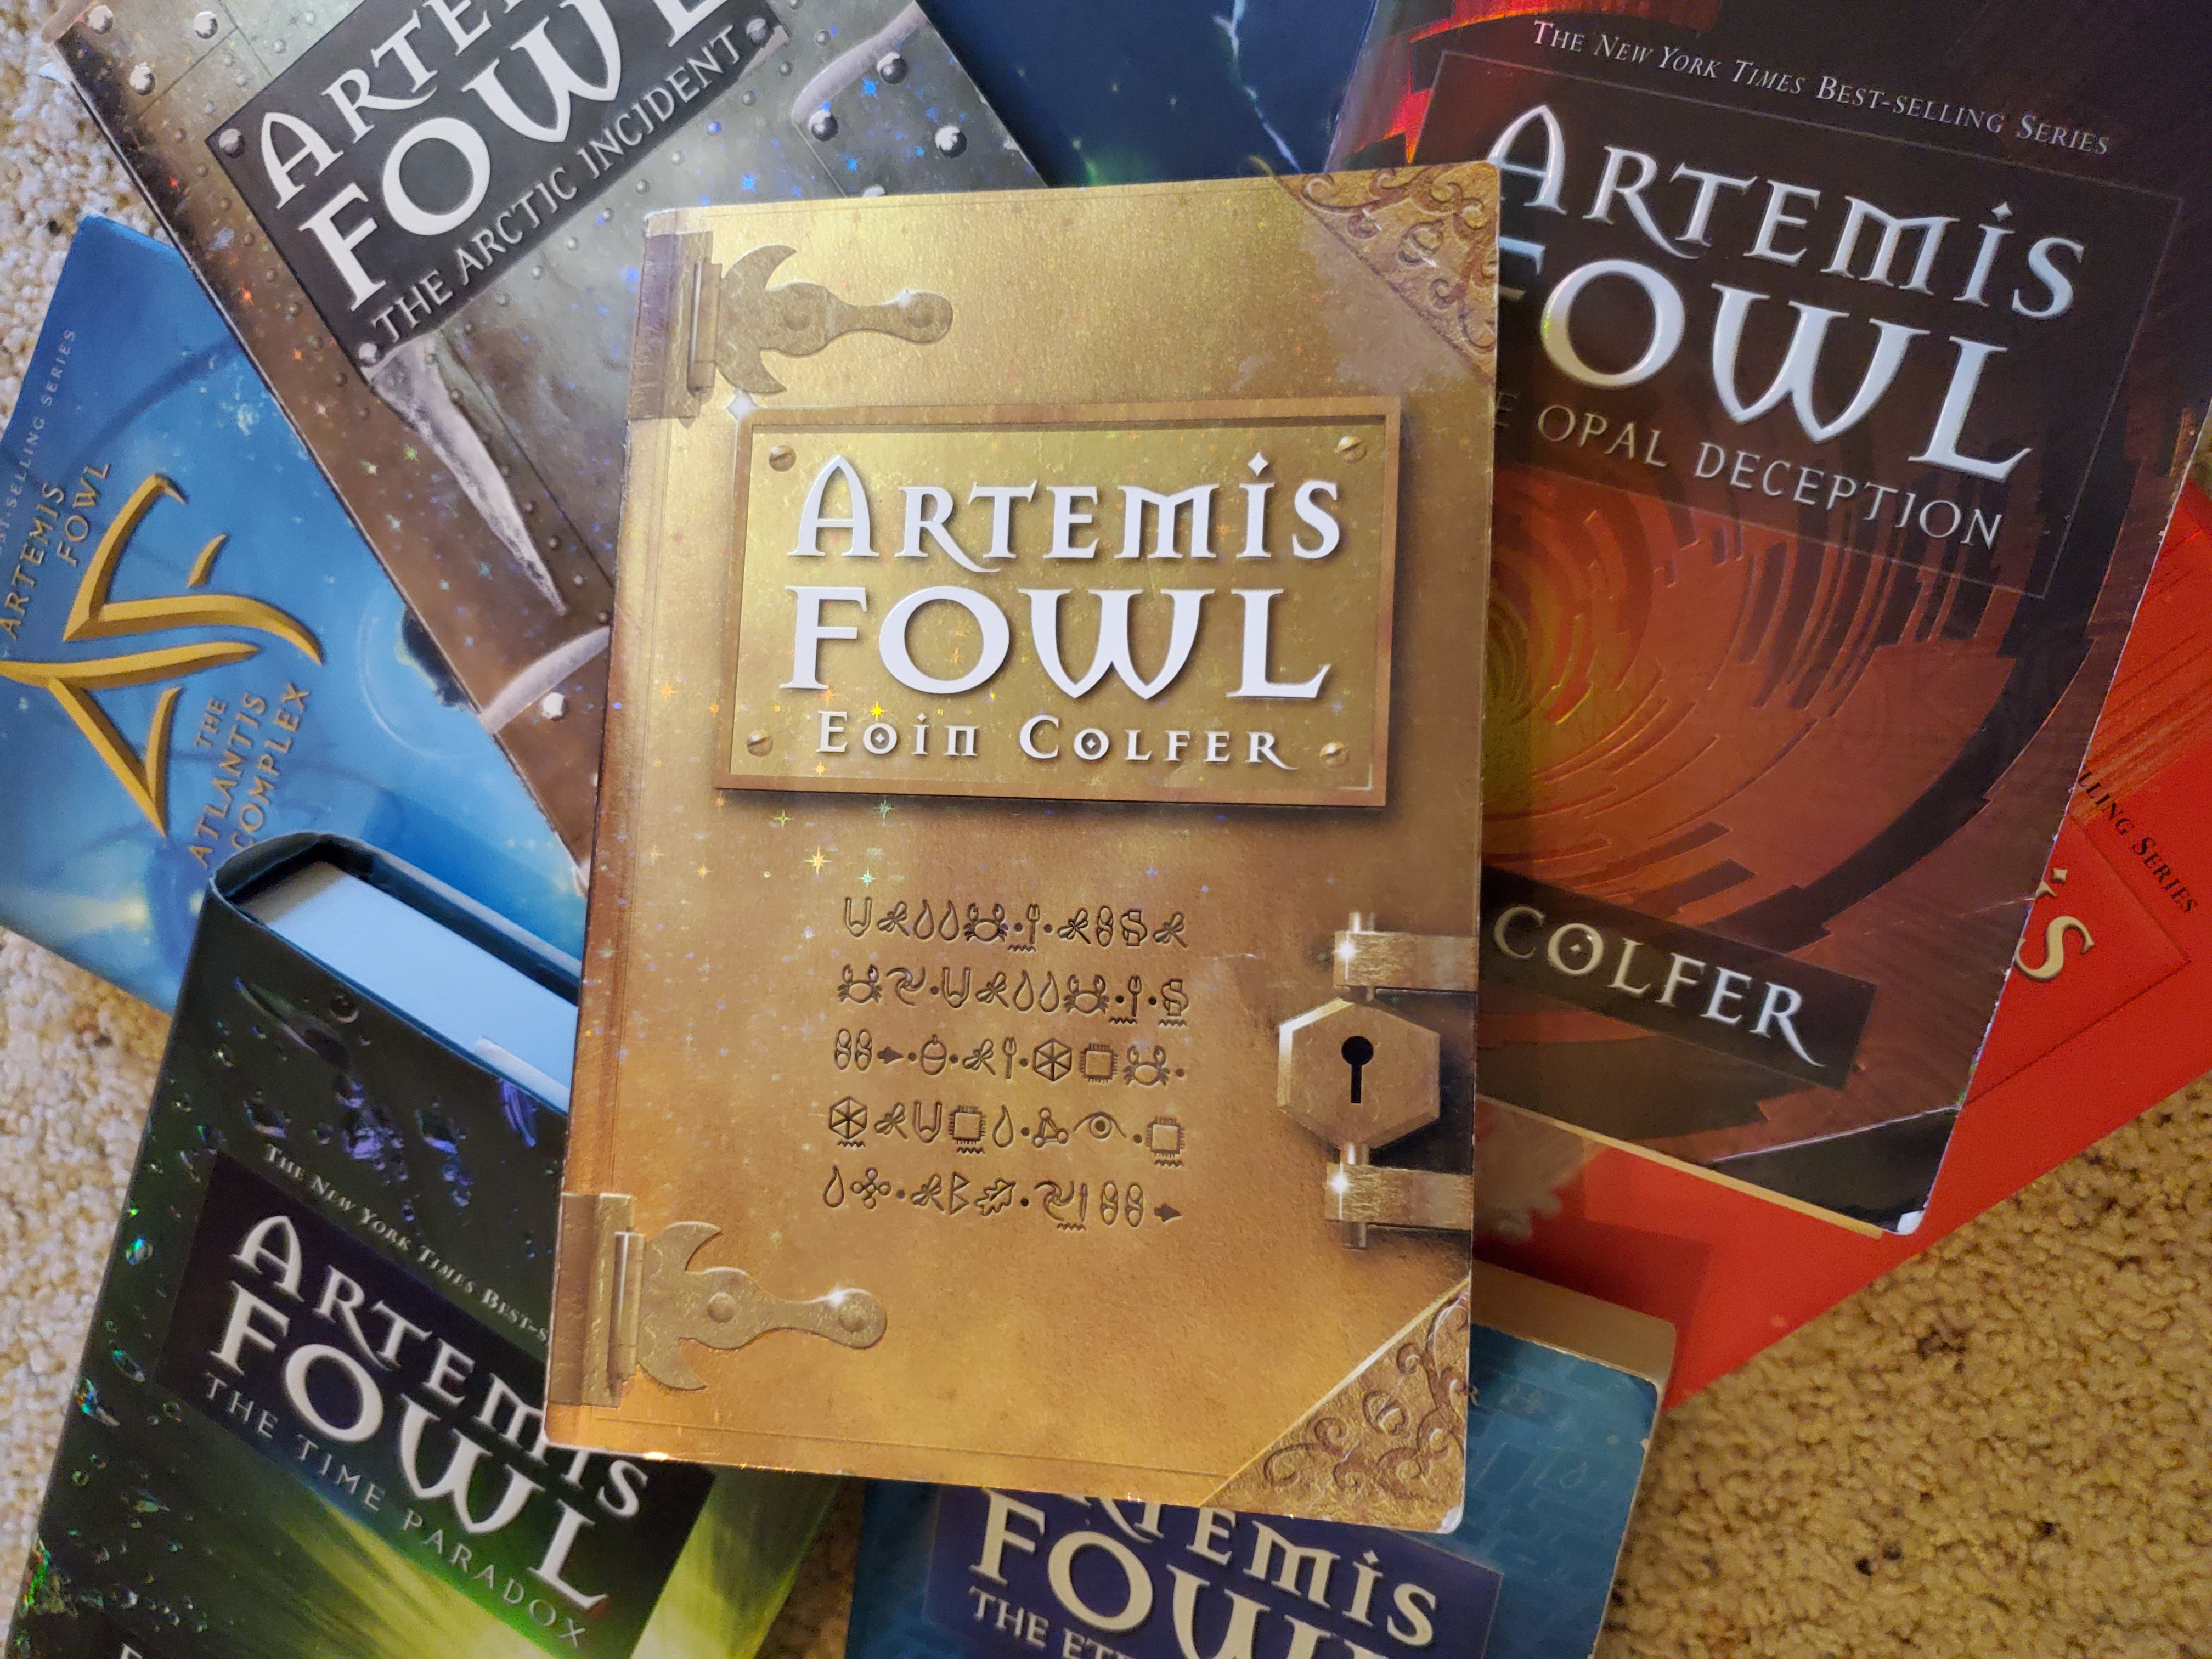 What Happened to 'Artemis Fowl'?